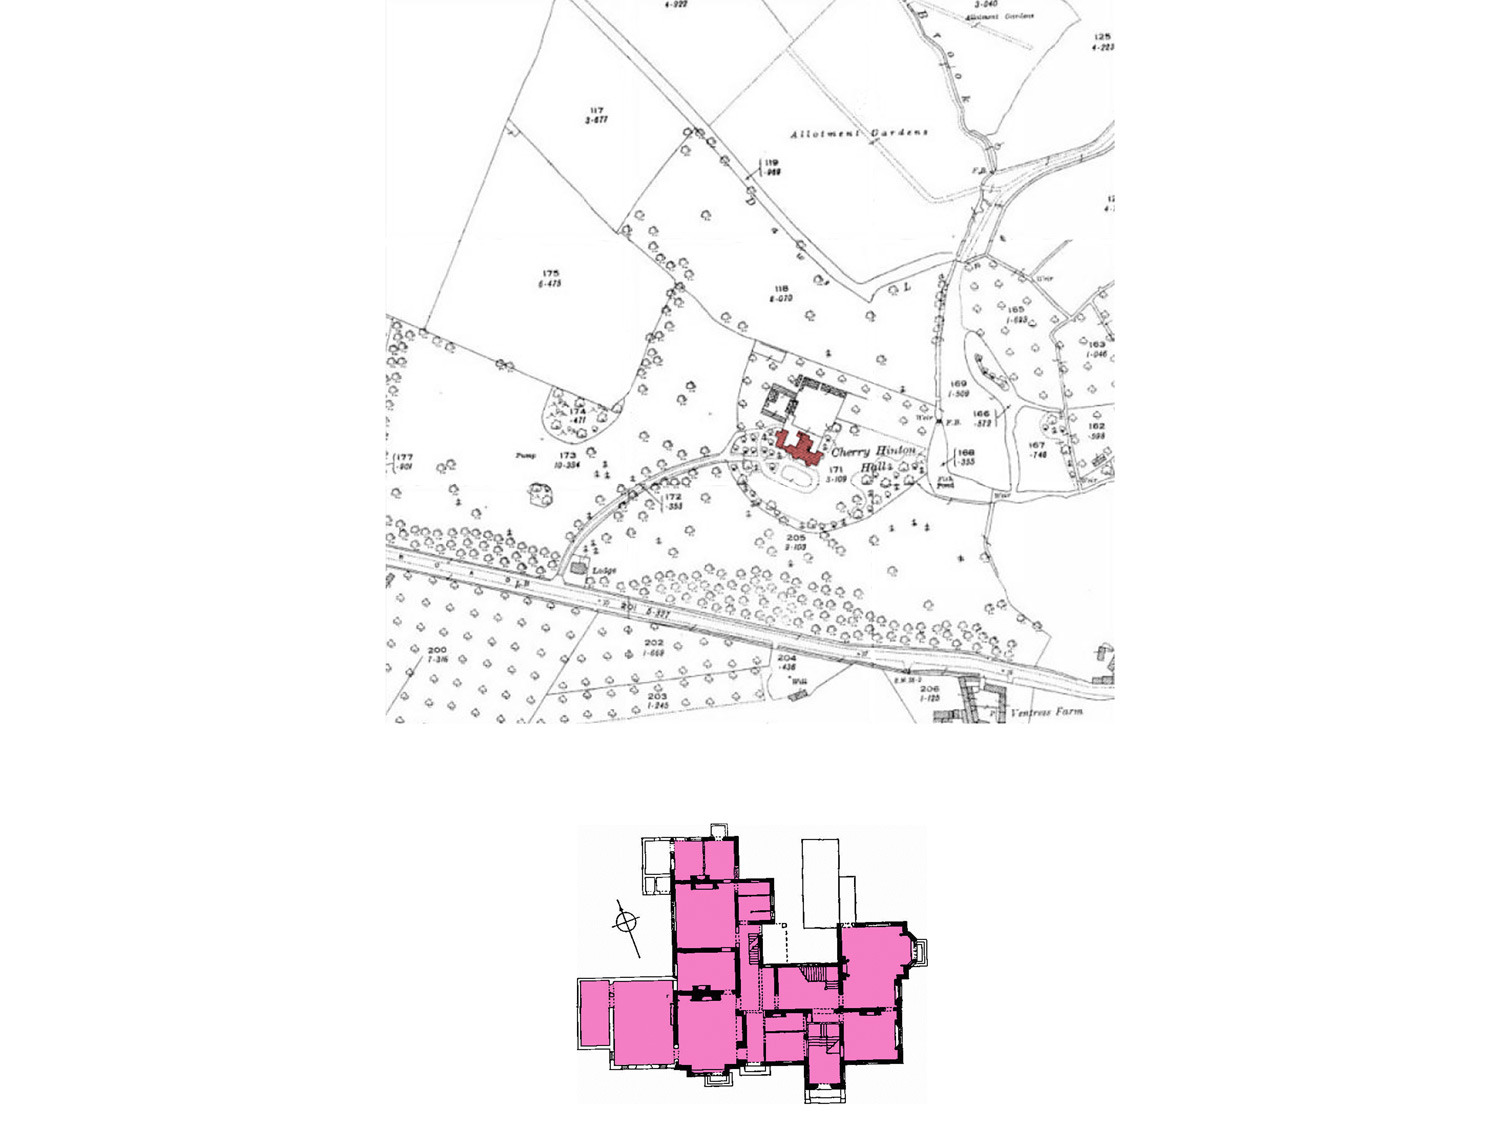 Surrounding buildings in the area with Cherry Hinton Hall highlighted in red and pink as of 1927